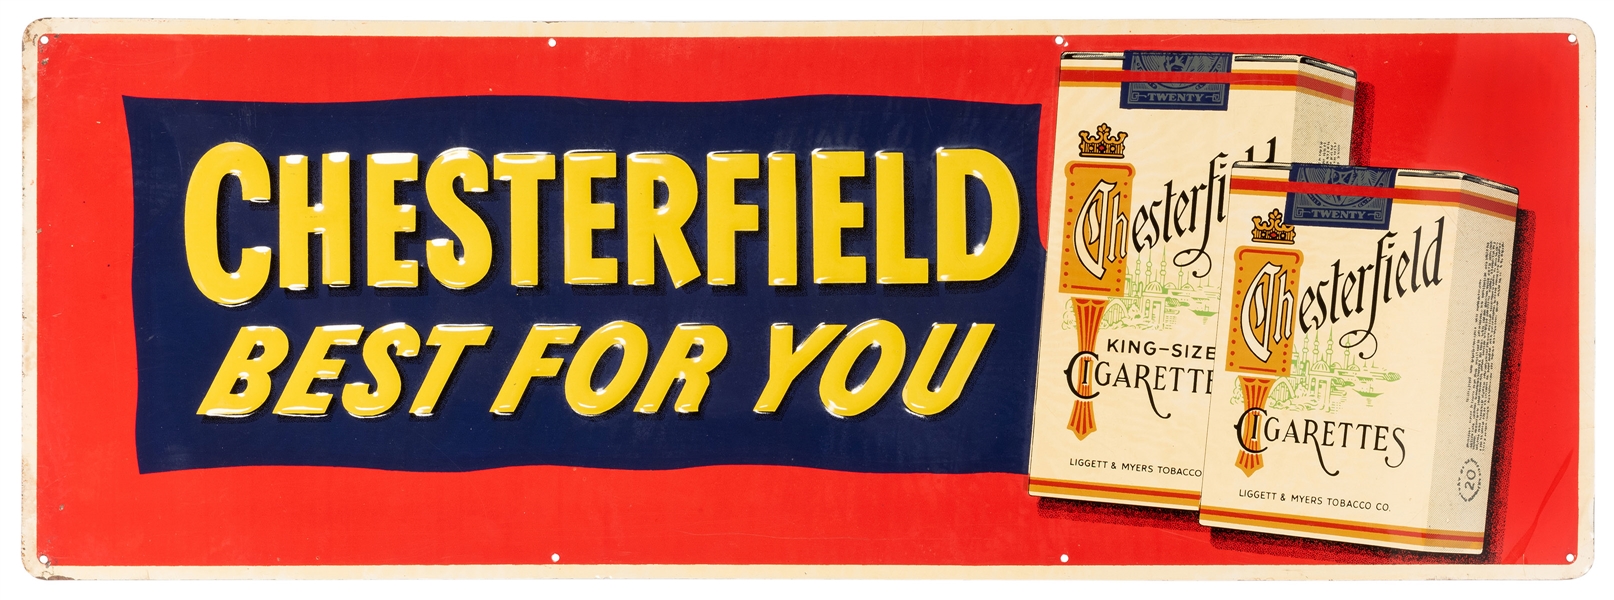  Chesterfield Cigarettes Tin Sign. Liggett & Myers Tobacco C...